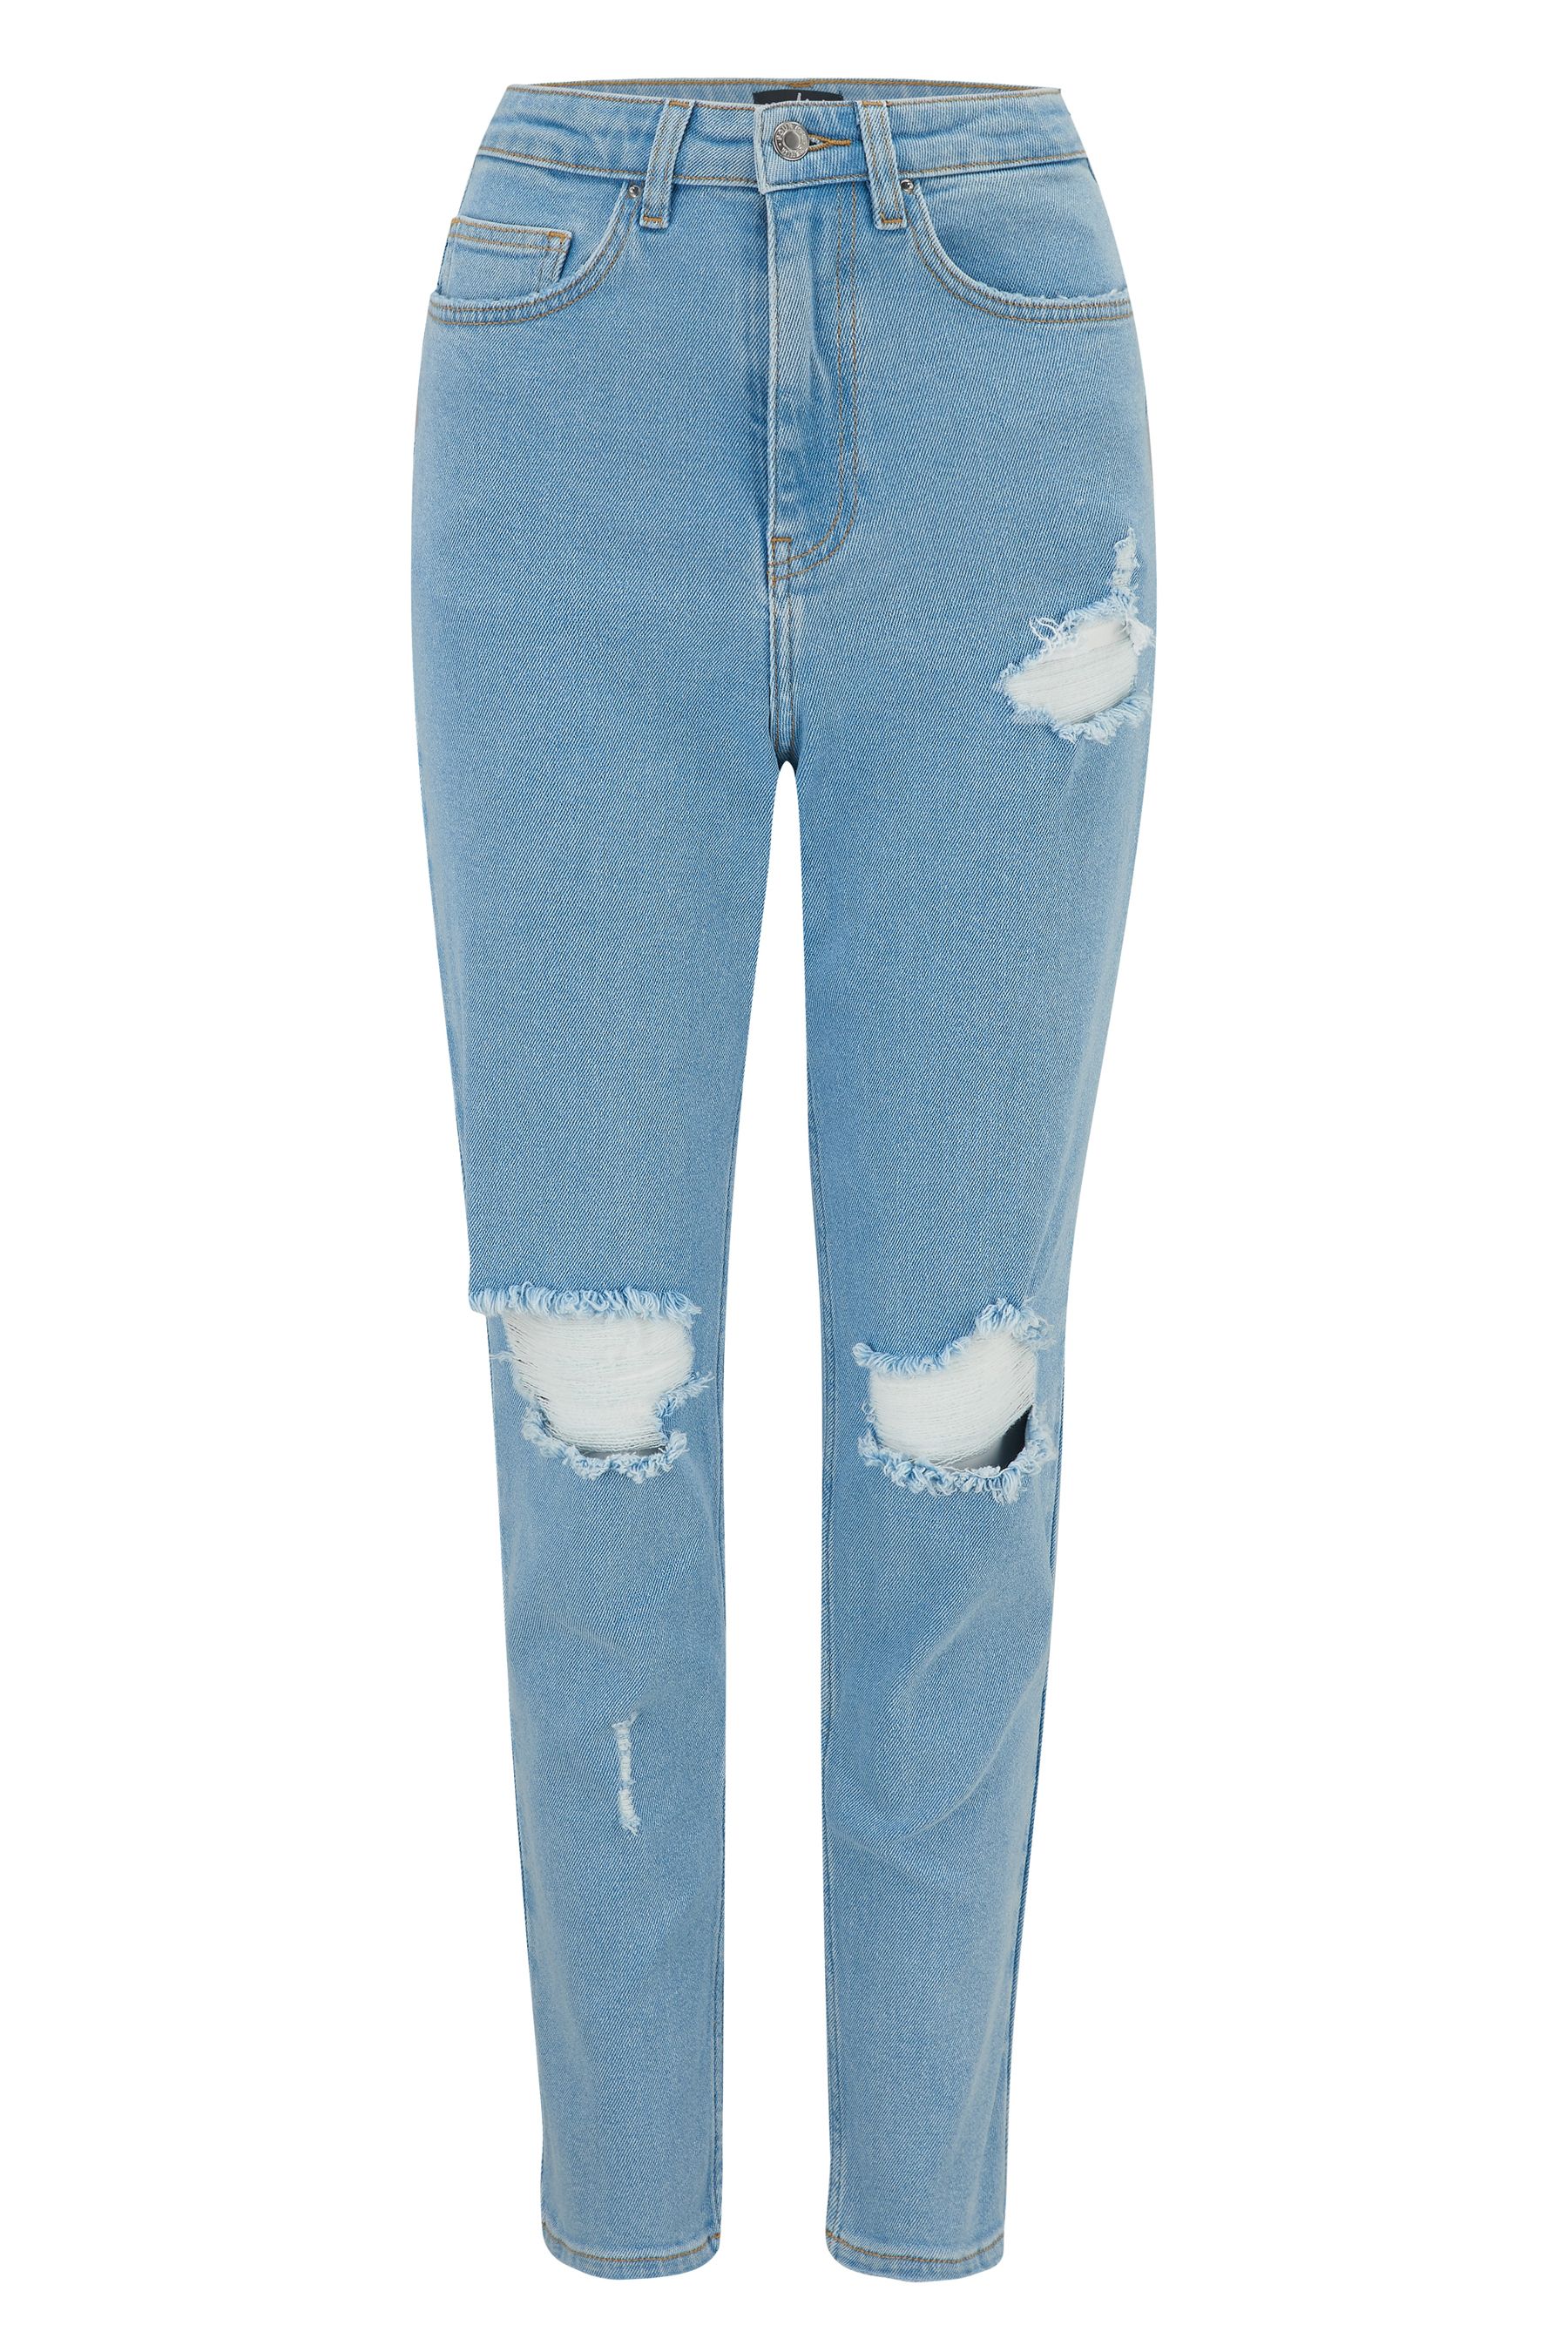 Buy Pour Moi Blue Aubrey Ripped Jeans from the Next UK online shop